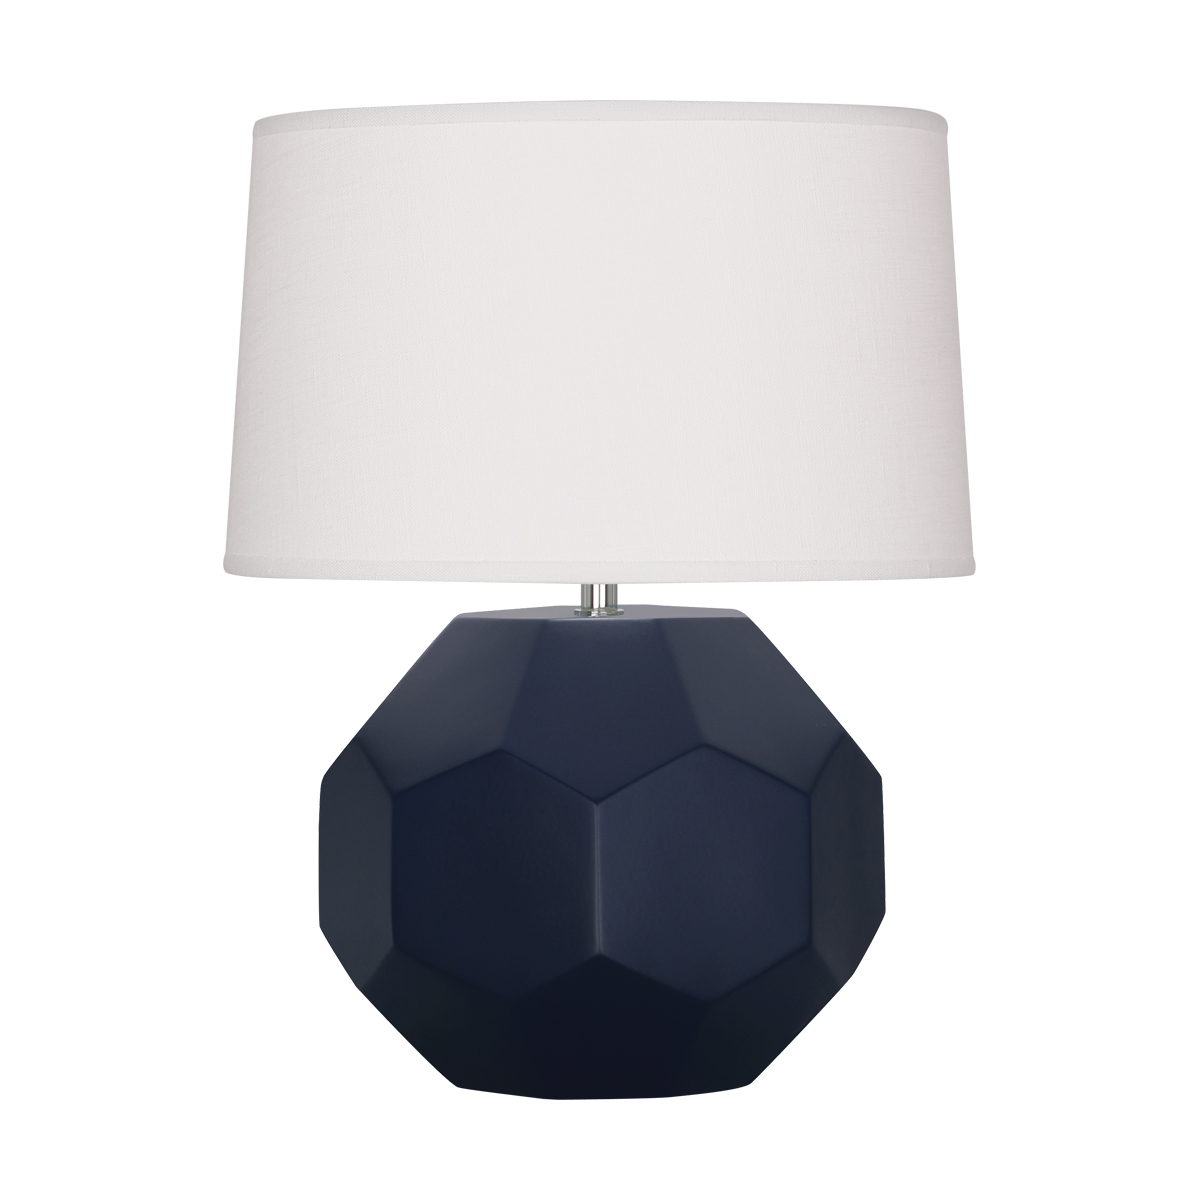 Franklin Accent Lamp Style #MMB02